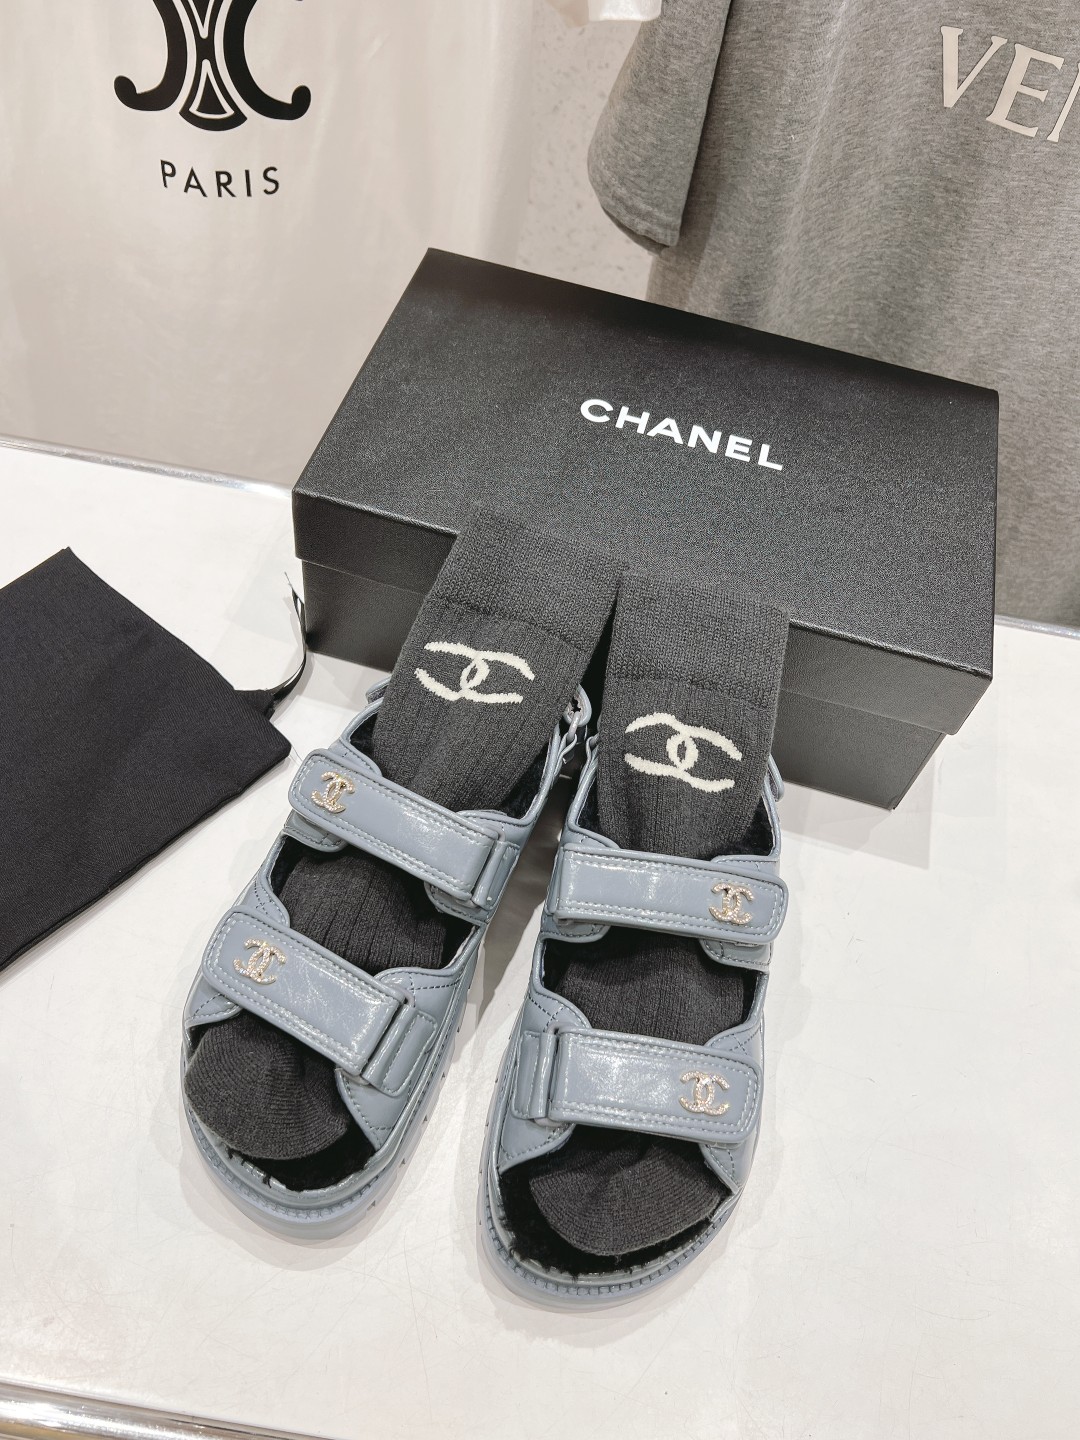 Chanel Shoes Sandals Lambswool Patent Leather Fall/Winter Collection